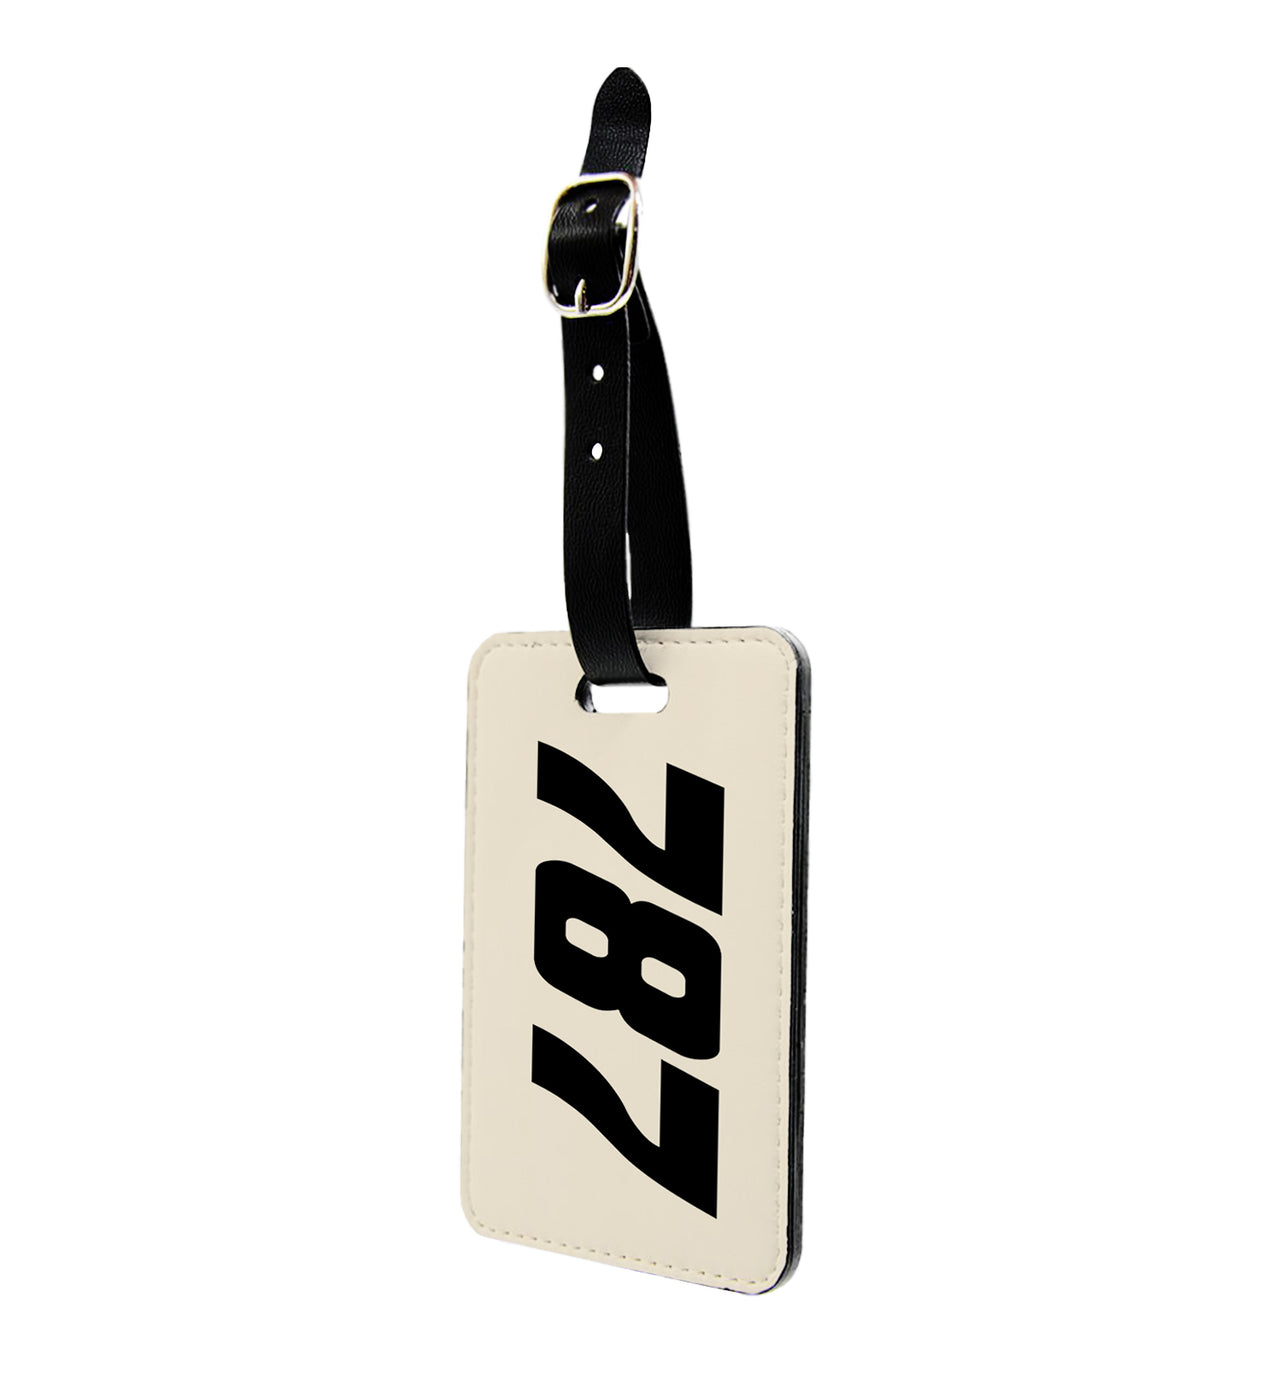 Boeing 787 Text Designed Luggage Tag